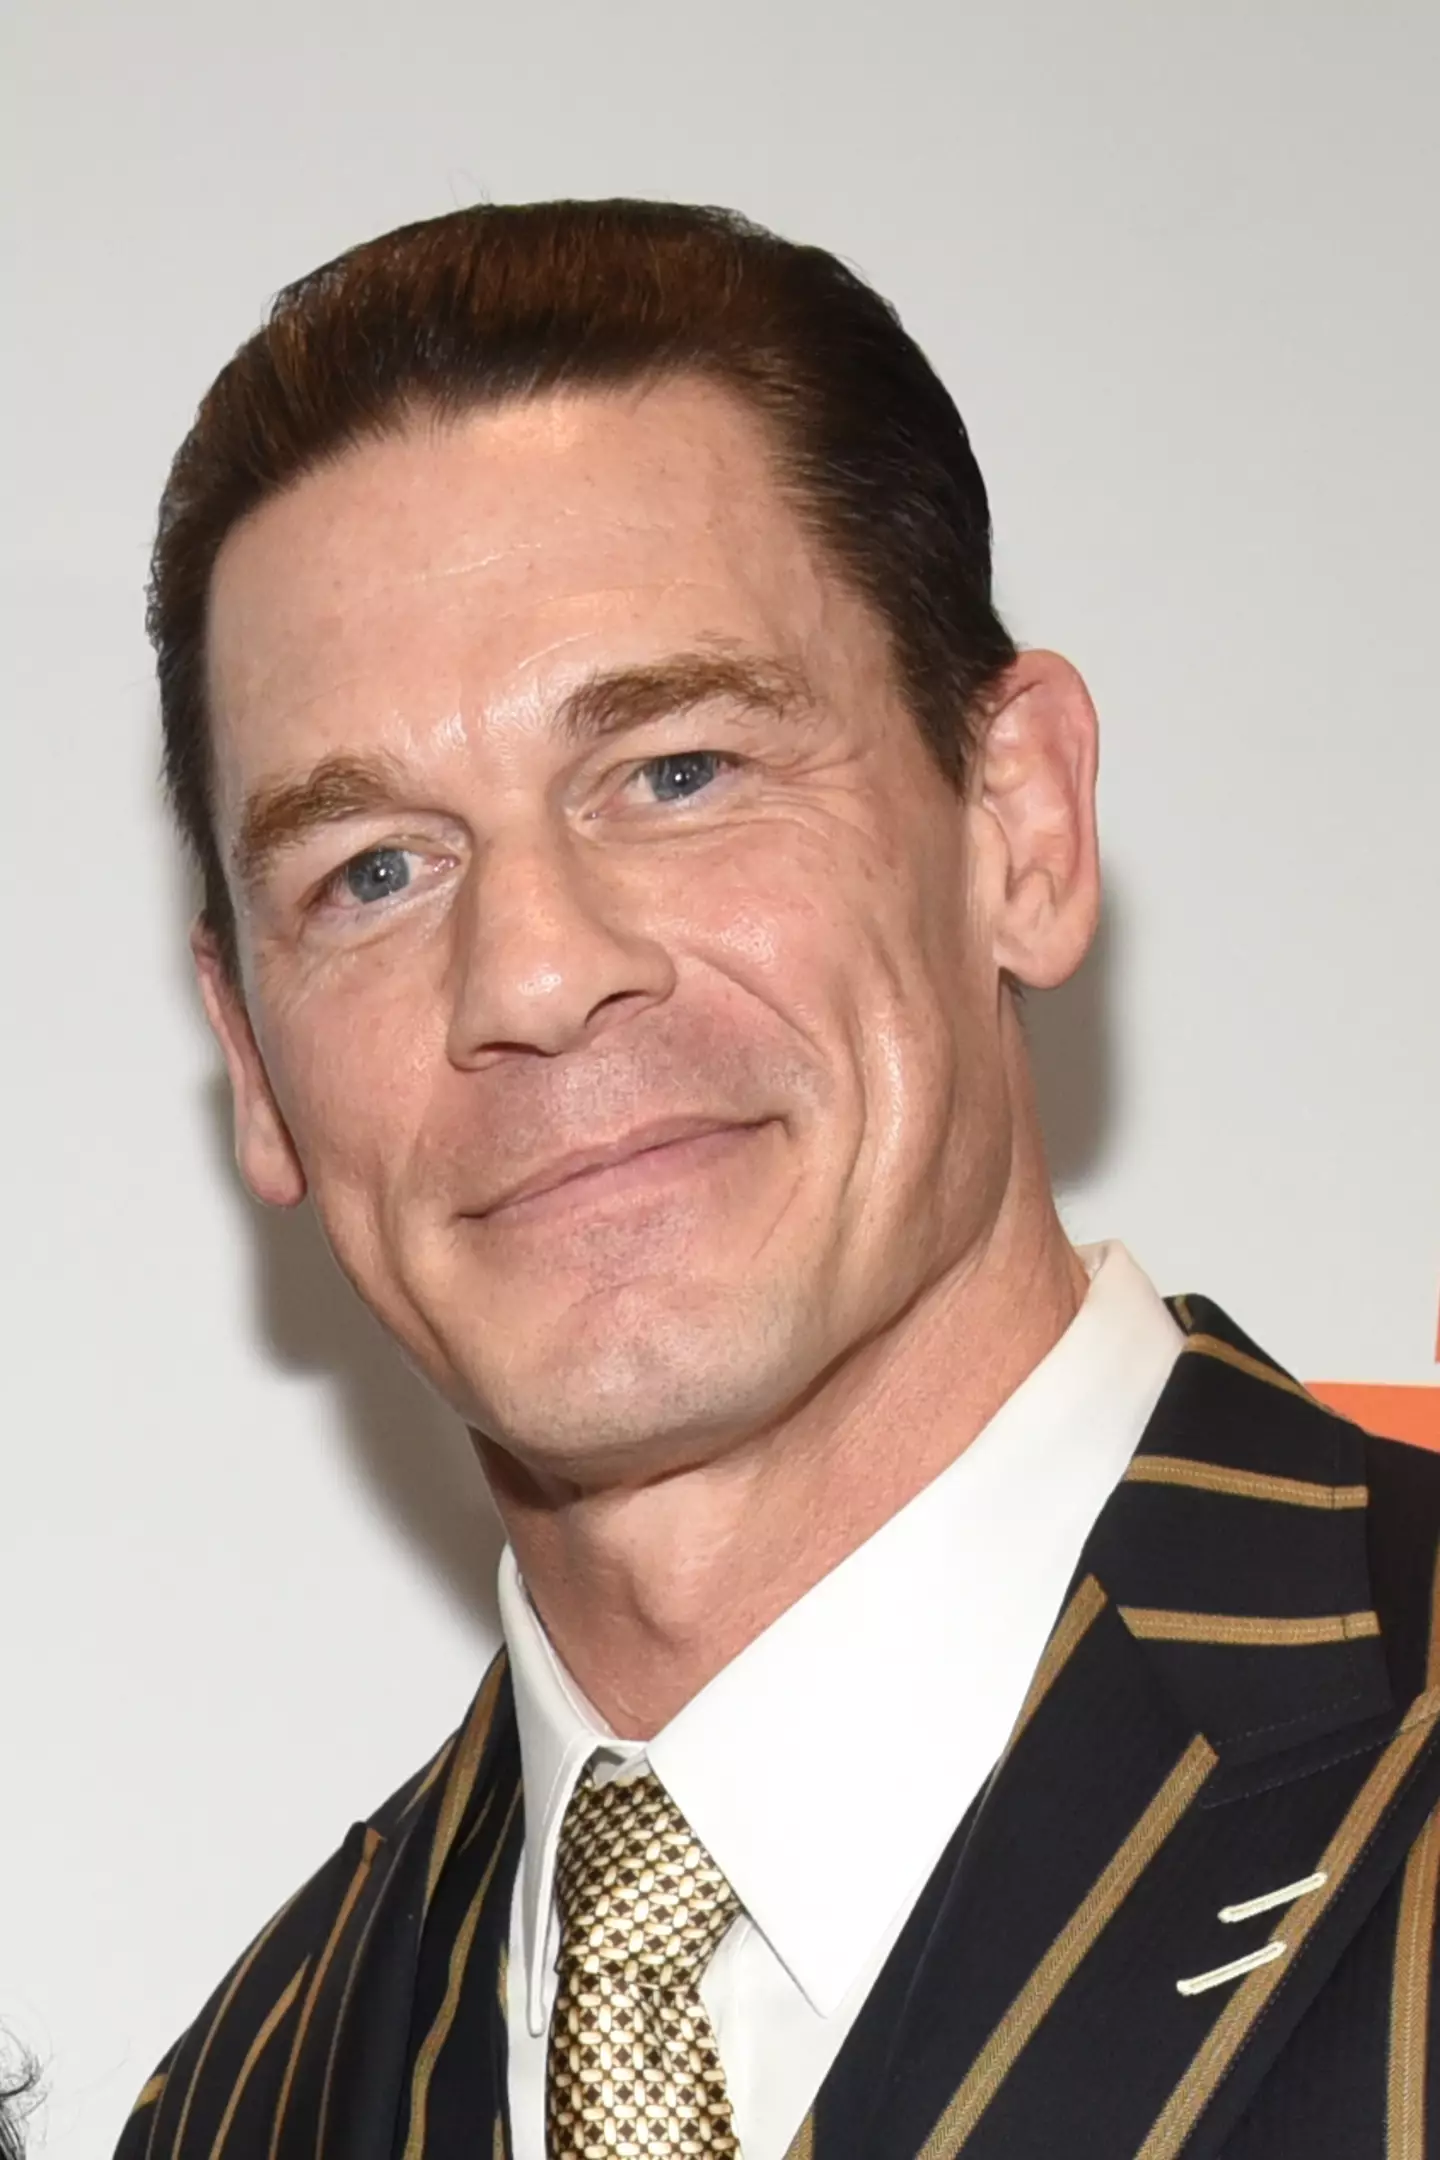 Cena said that his older brother faced bullying over his sexuality. (Steve Eichner/Variety via Getty Images)